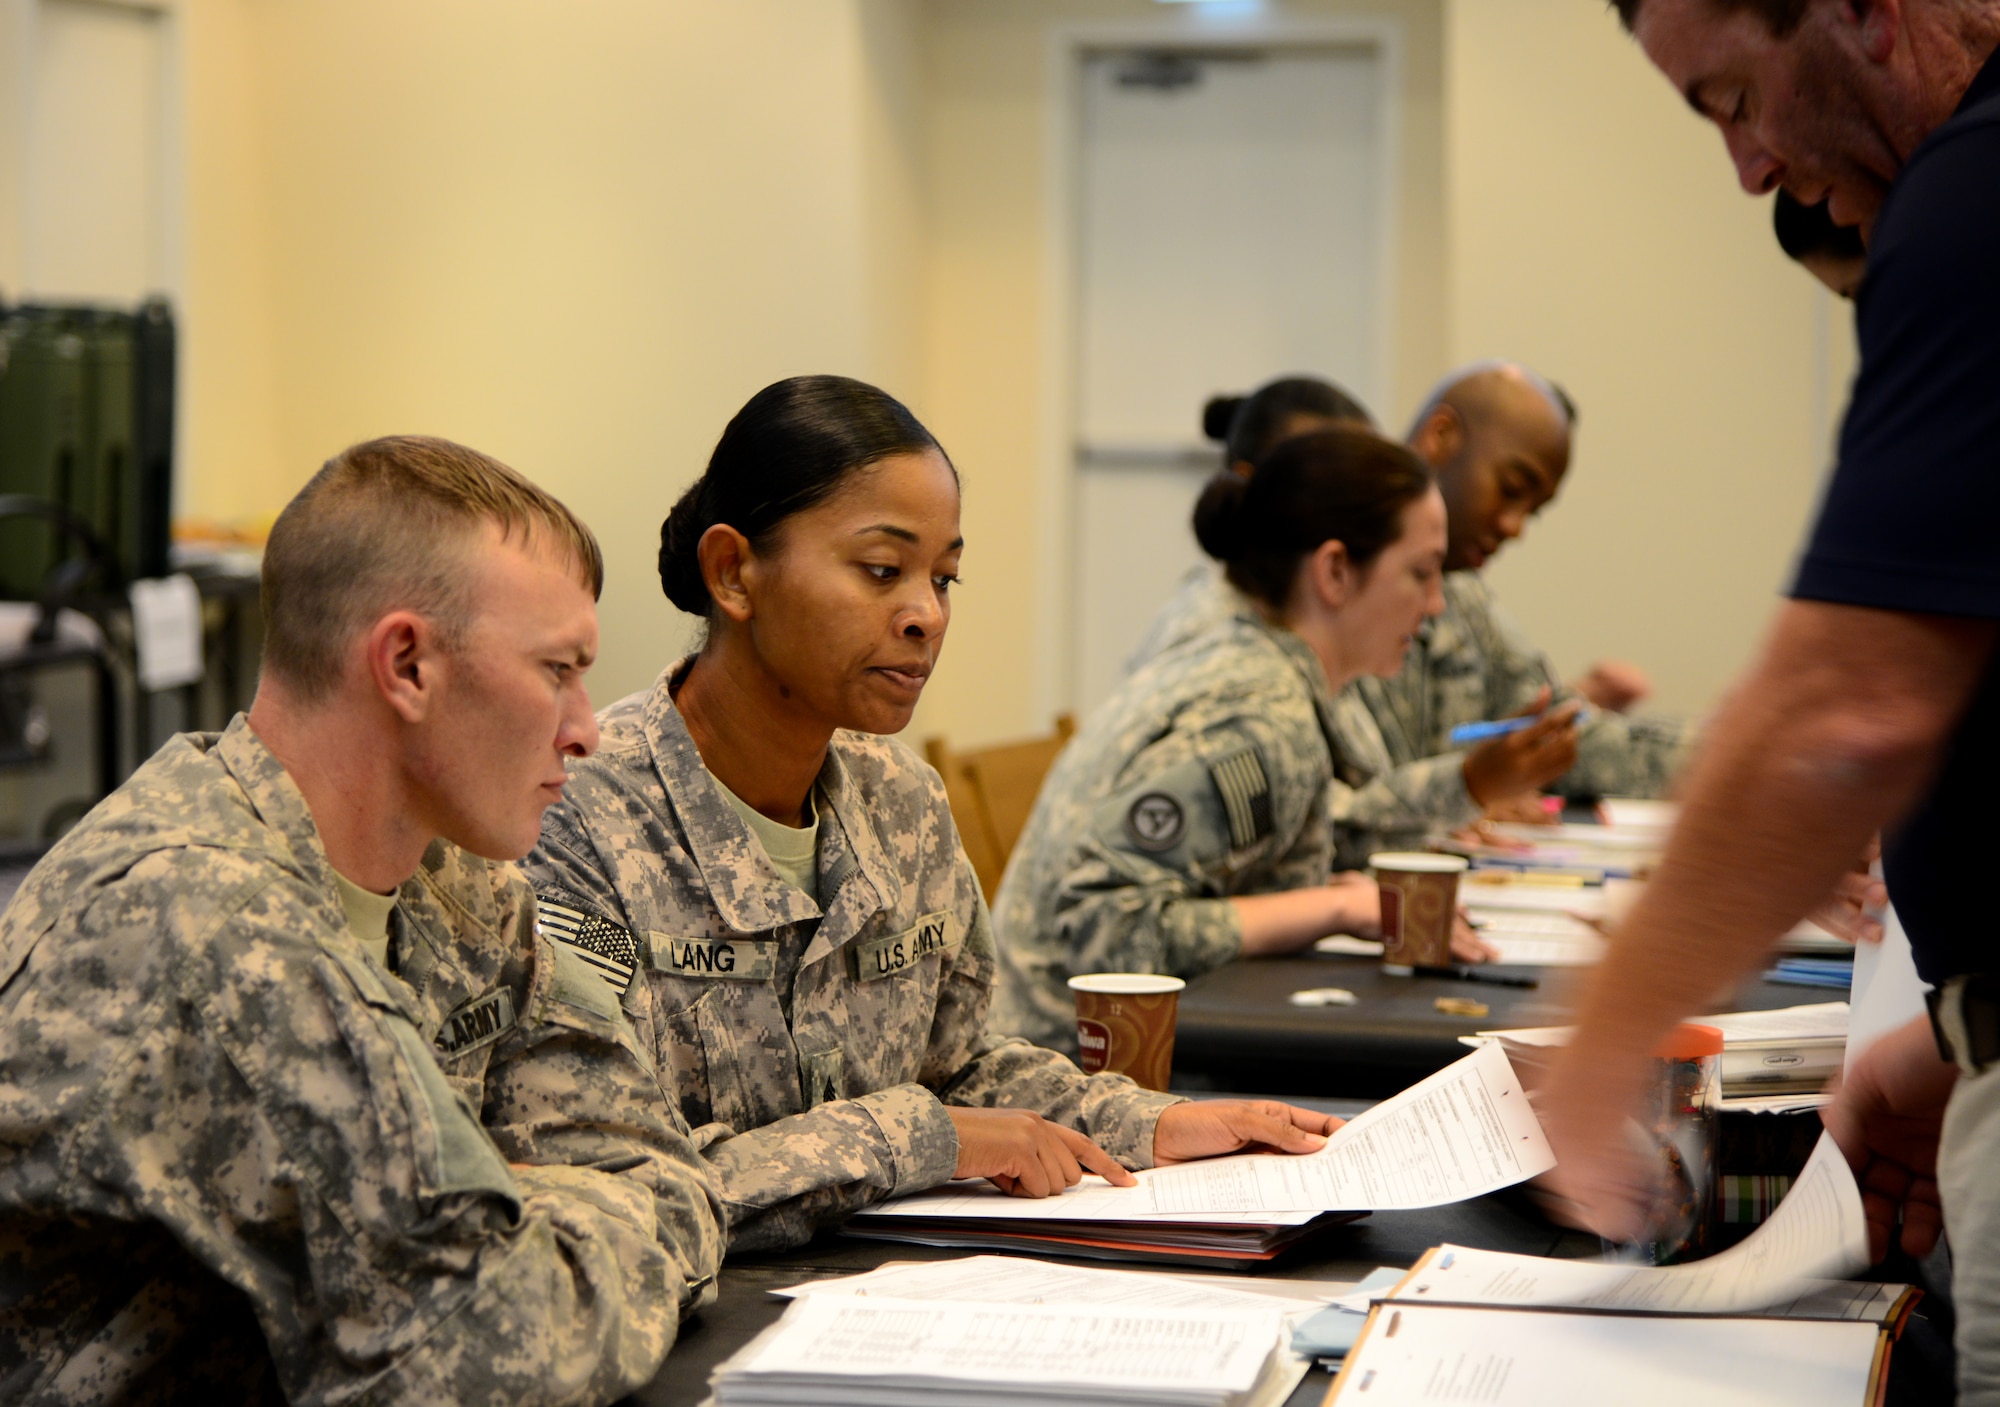 U.S. Army Sgt. Sheena Lang, center, Area Support Group-Qatar finance, helps participants of a Noncombatant Evacuation Operations exercise fill out paperwork, Dec. 6, 2014, at Camp As Sayliyah, Qatar. The exercise allowed noncombatants and military members from the Air Force and Army to rehearse evacuation procedures in the event of an emergency in the host nation. (U.S. Air Force photo by Senior Airman Kia Atkins)